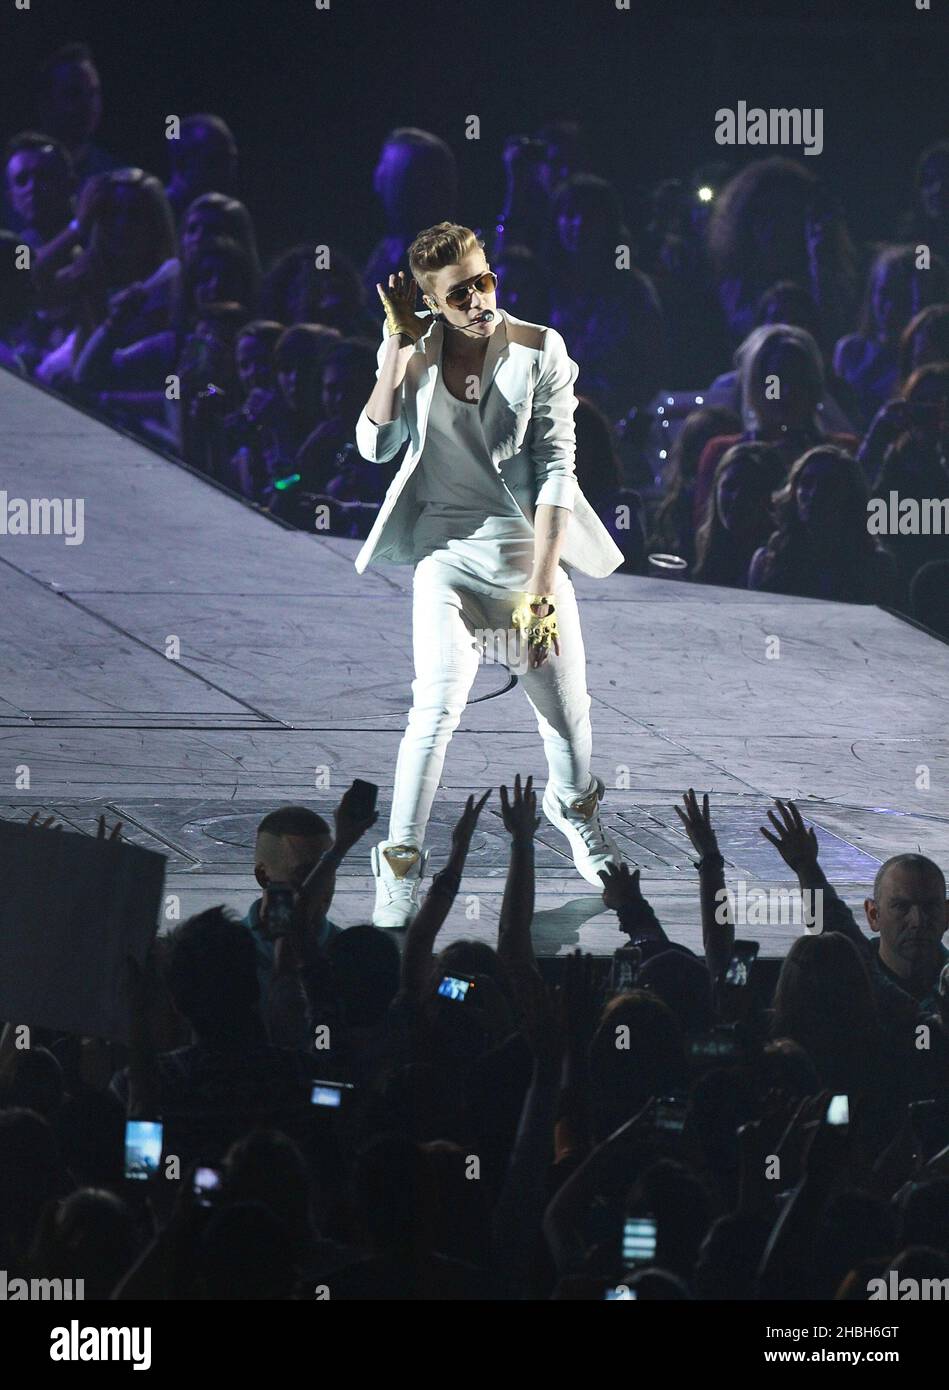 Justin Bieber performs at the 02 Arena in London. Stock Photo